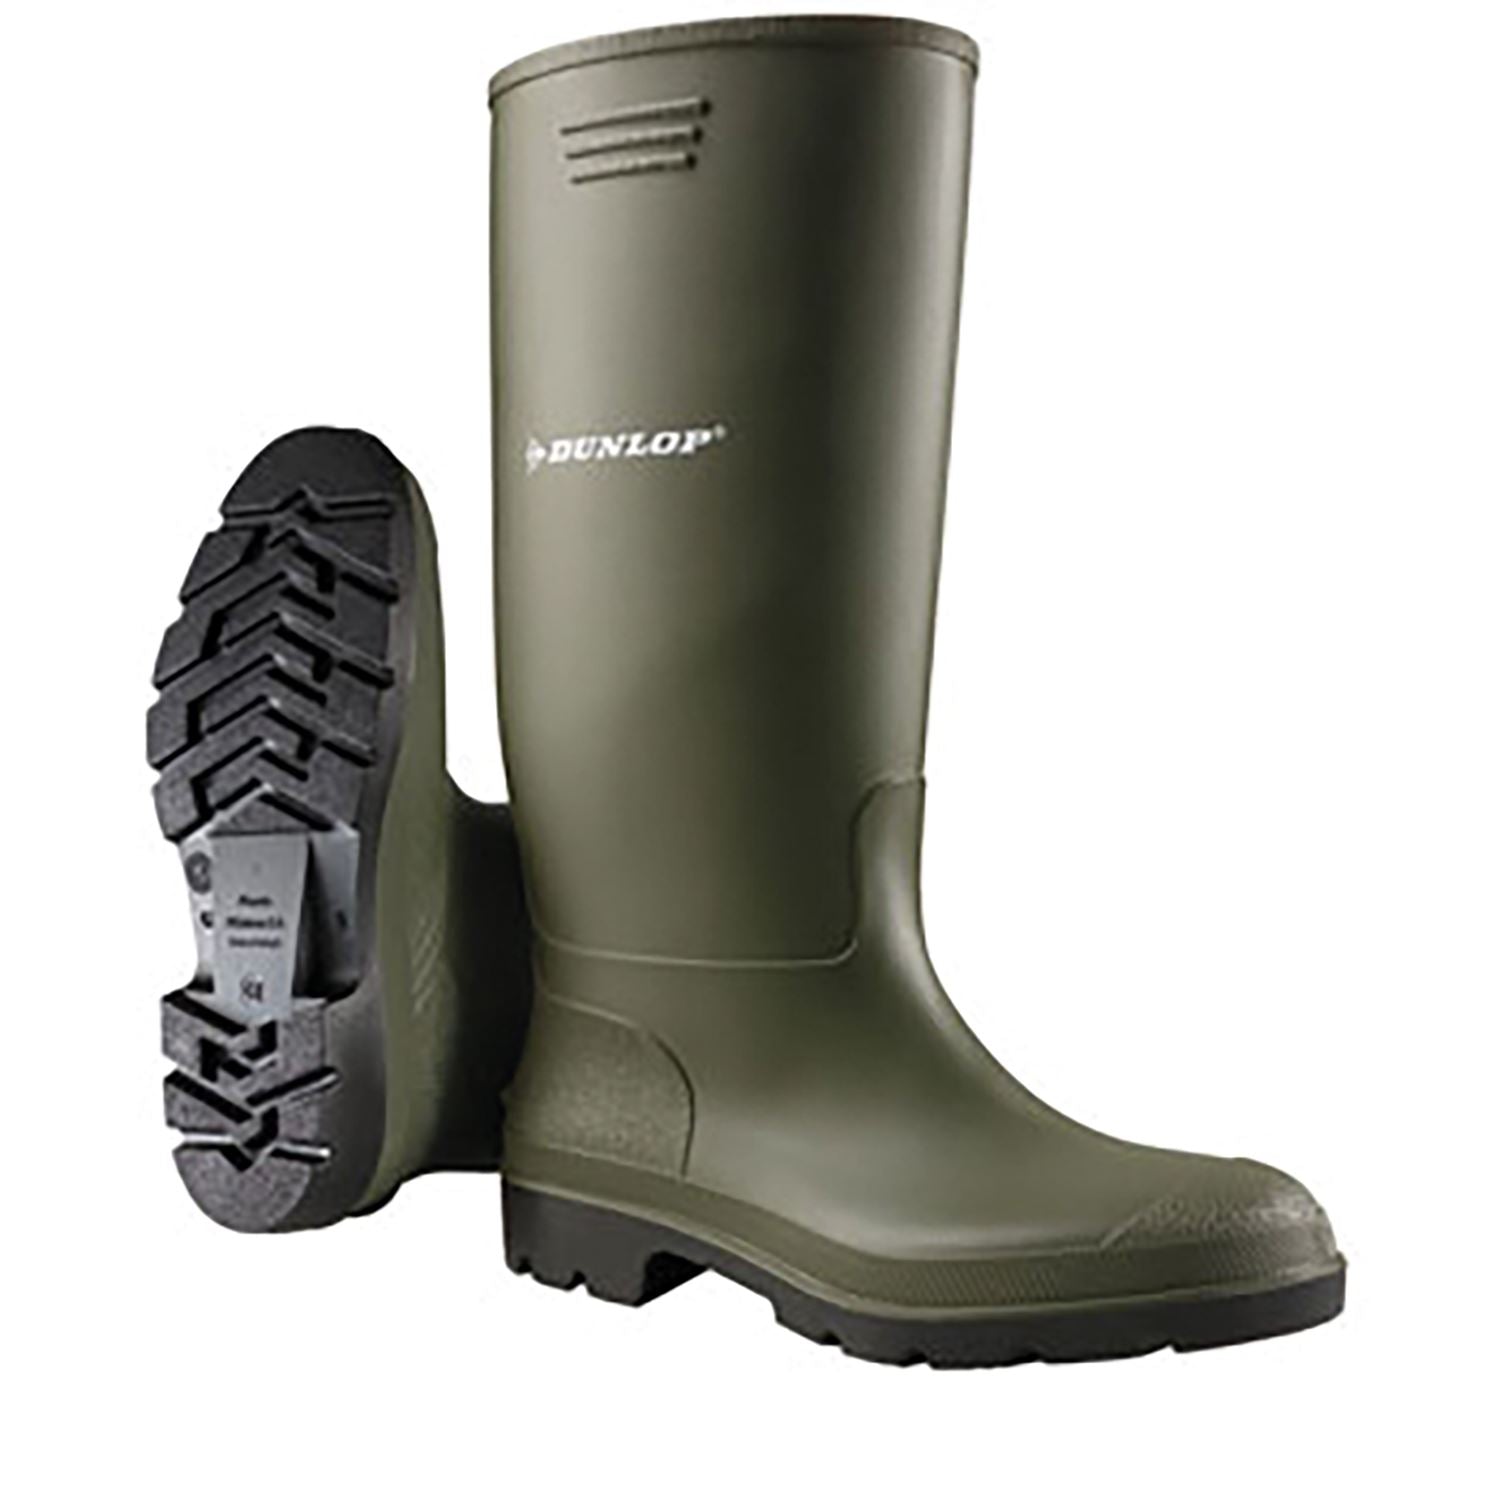 Dunlop Pricemastor Boots - Just Horse Riders